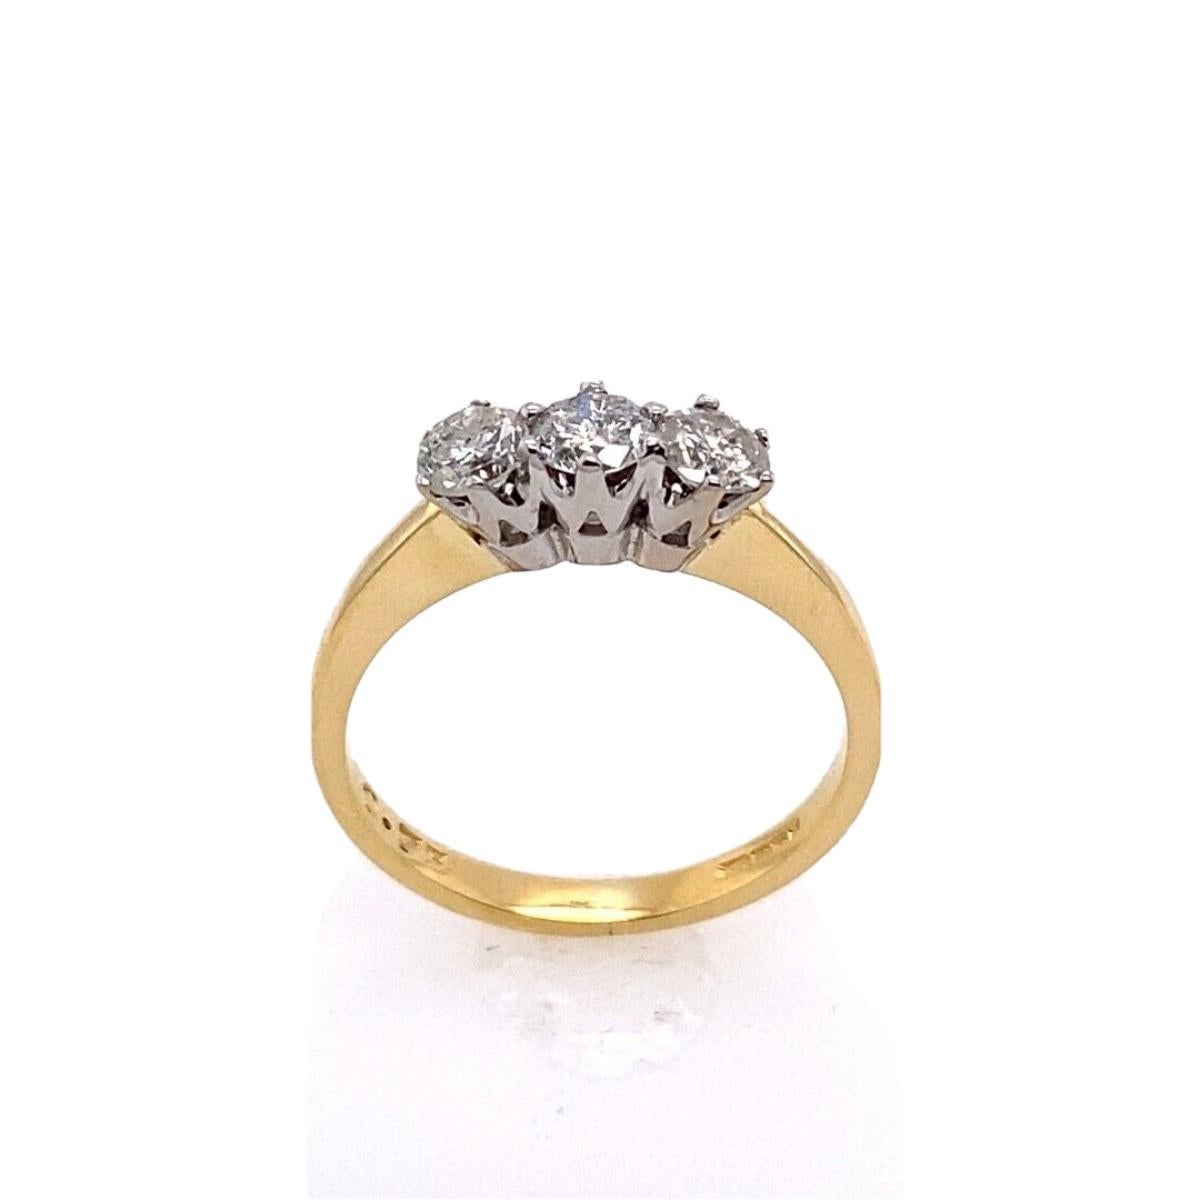 Classic 18ct Yellow Gold 3-Stone Trilogy Ring, Set With 3-Diamonds, 0.75ct

This classic three-stone trilogy ring is set with three diamonds. Is a beautiful ring that can be worn by itself or as part of a stackable ring collection. The three stones